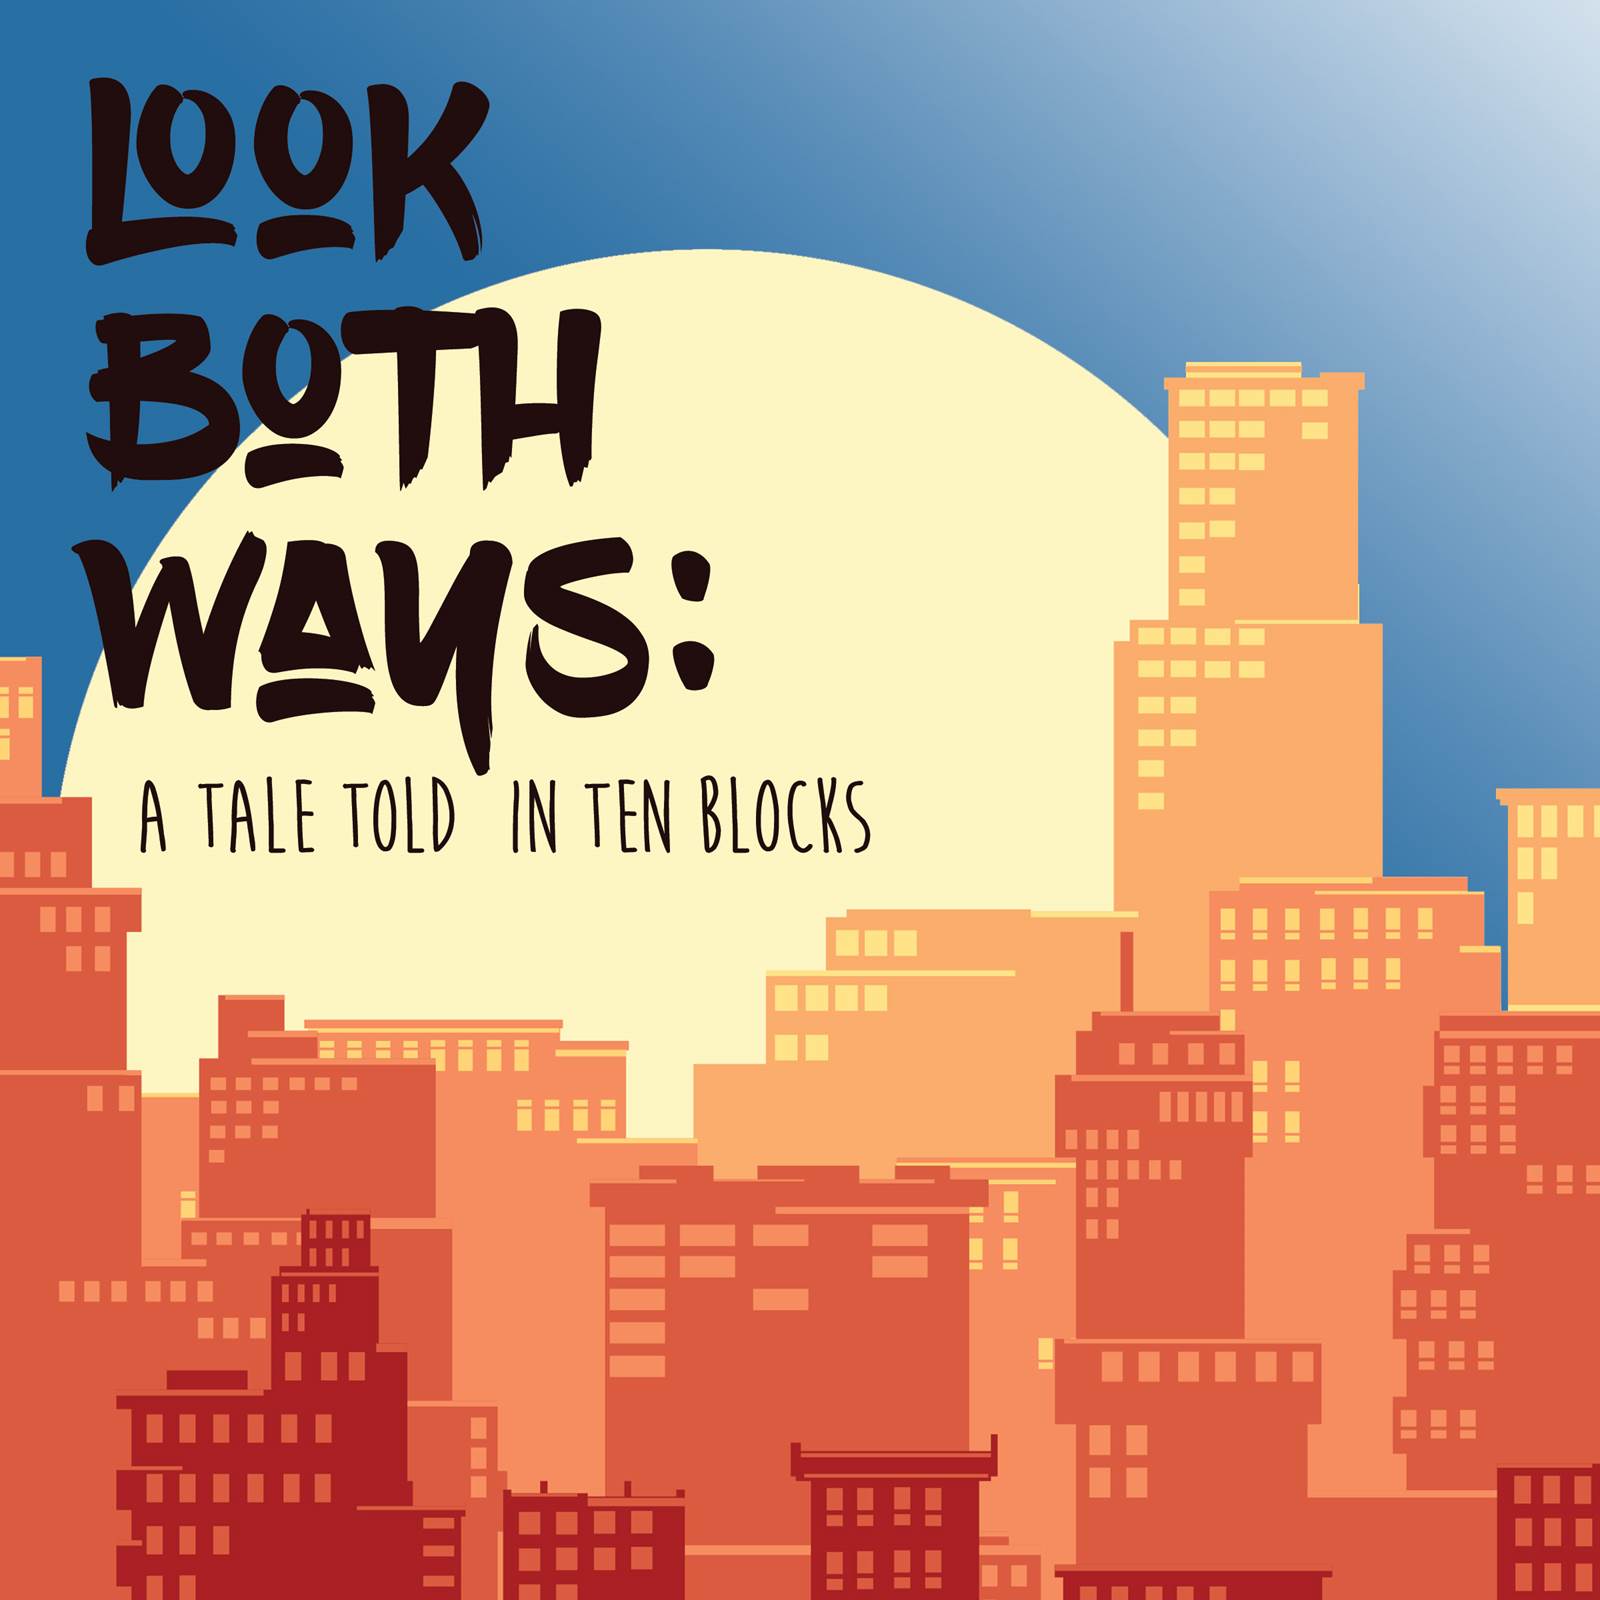 An illustration of a city skyline with buildings in different shades of orange are set against a large pale yellow sun on the horizon. The title "Look Both Ways: A Tale Told in Ten Blocks" is in black capitalized lettering in the upper left hand of the image.